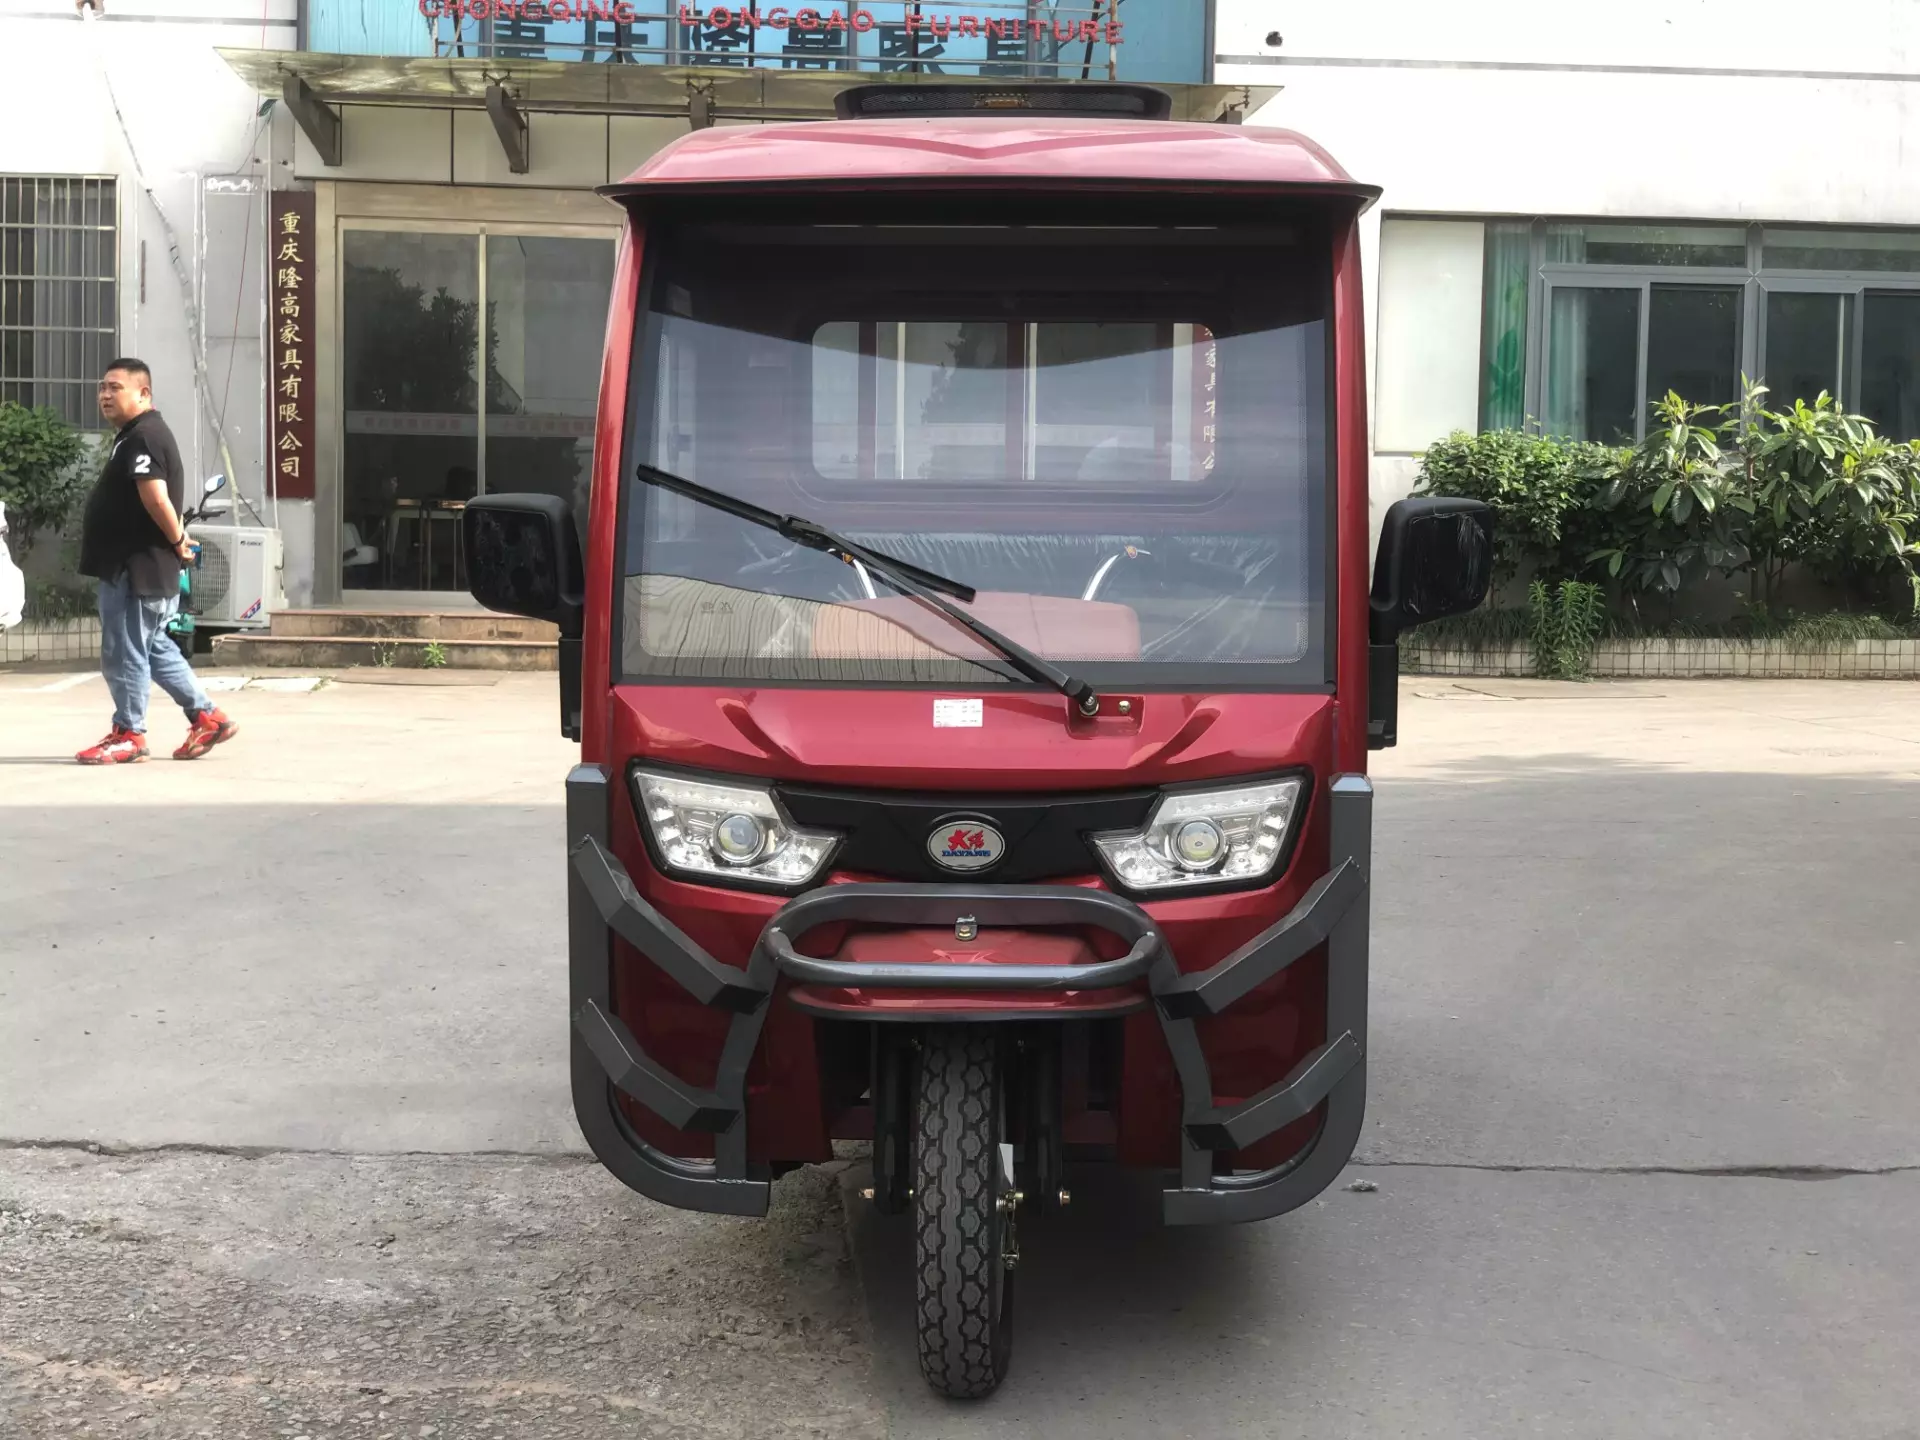 DAYANG BEIYI Electric Cargo Tricycle Enclosed Mini Scooter for Adult 1500w 72V 45A Max Red Closed Body for Global Market 3.75-12